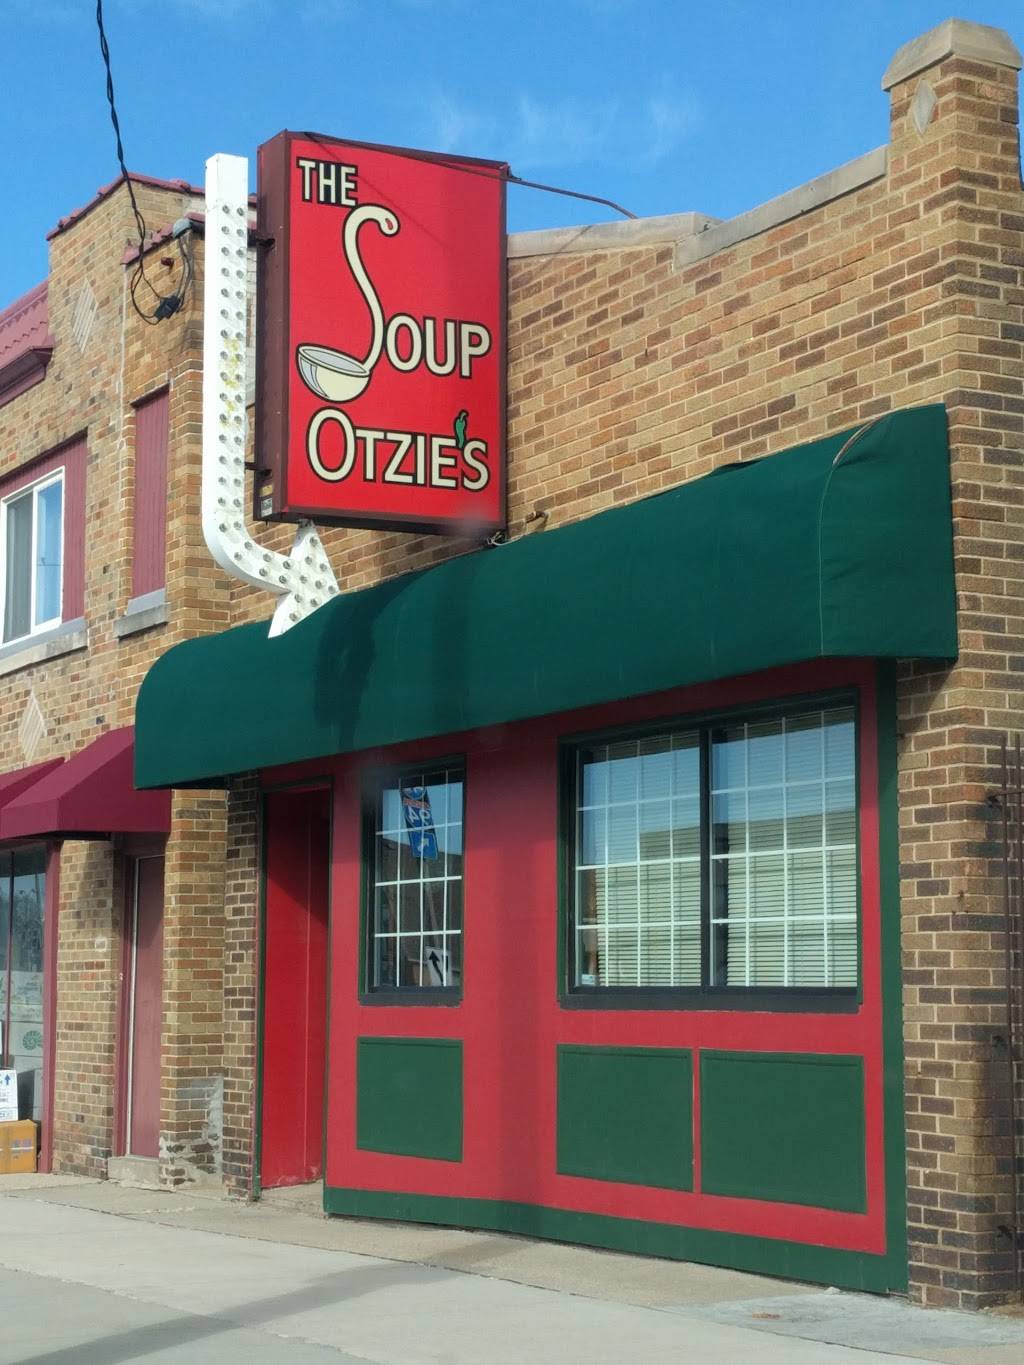 Soup Otzies | restaurant | 3950 S Howell Ave, Milwaukee, WI 53207, USA | 4147479670 OR +1 414-747-9670